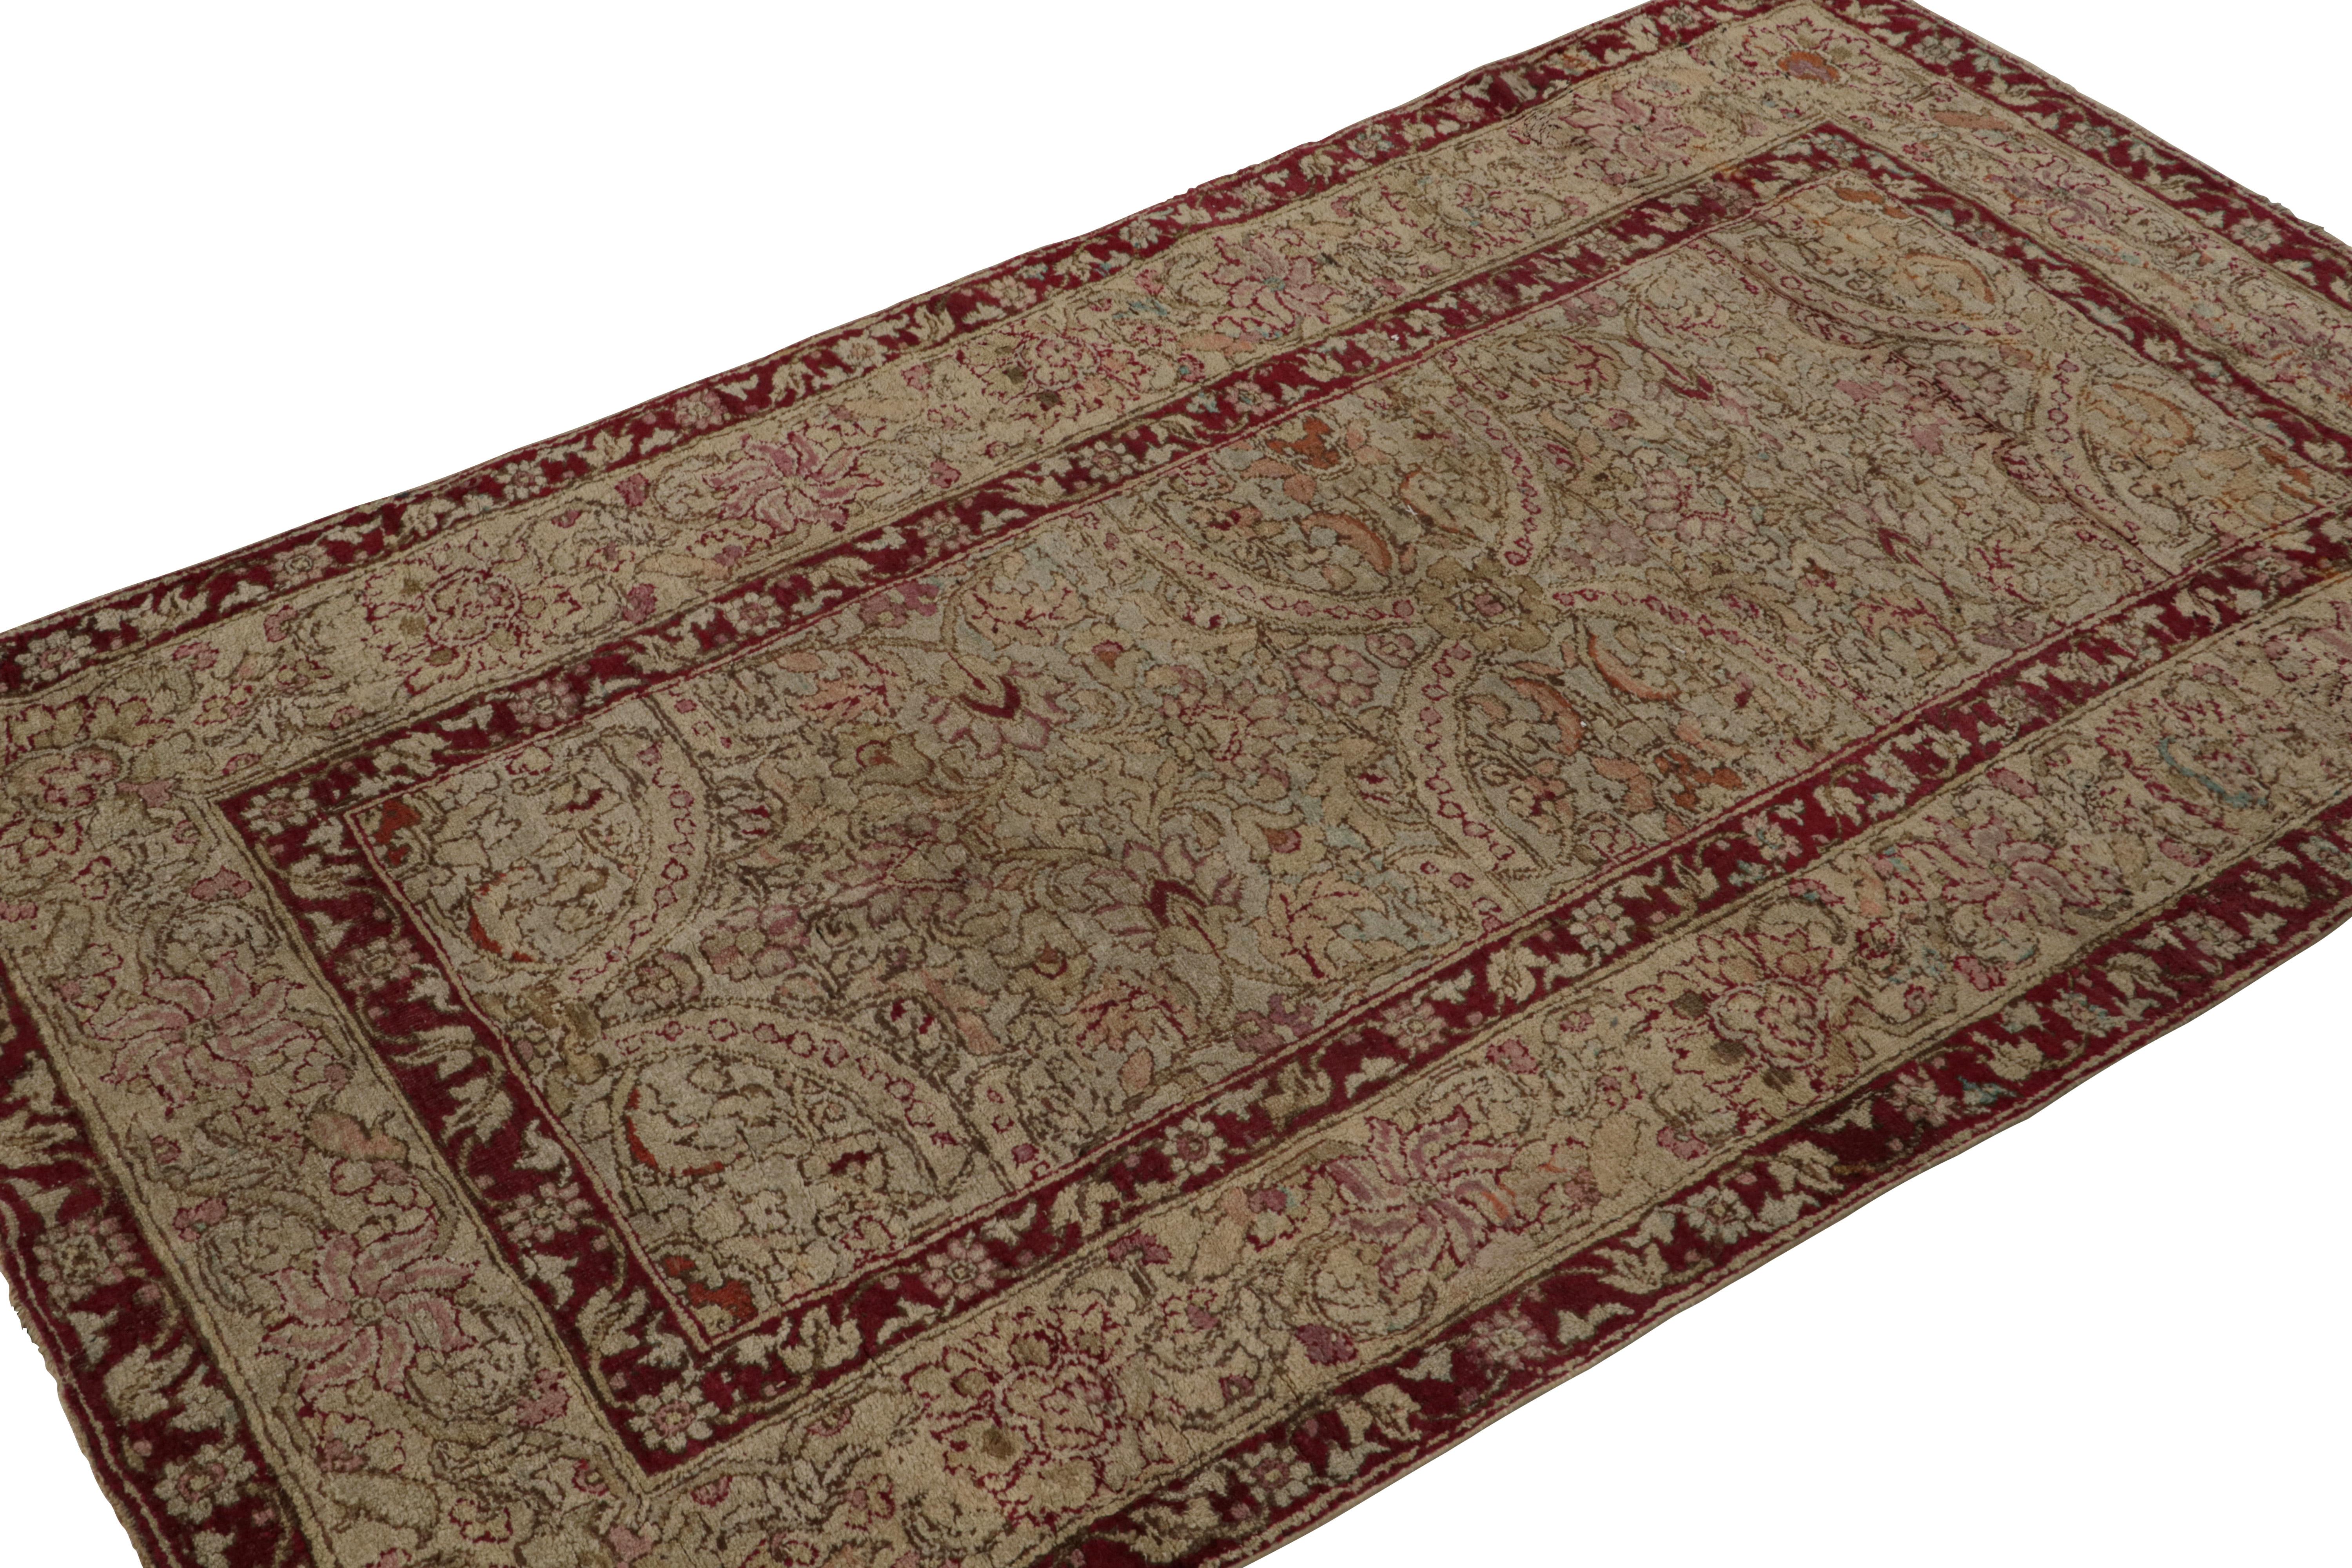 Hand-knotted in wool, circa 1880-1890, originating from India, this 4x6 Antique Agra rug features dense floral patterns in playful colors on a green field with beige and burgundy red borders 

On the Design: 

The intricate craftsmanship and